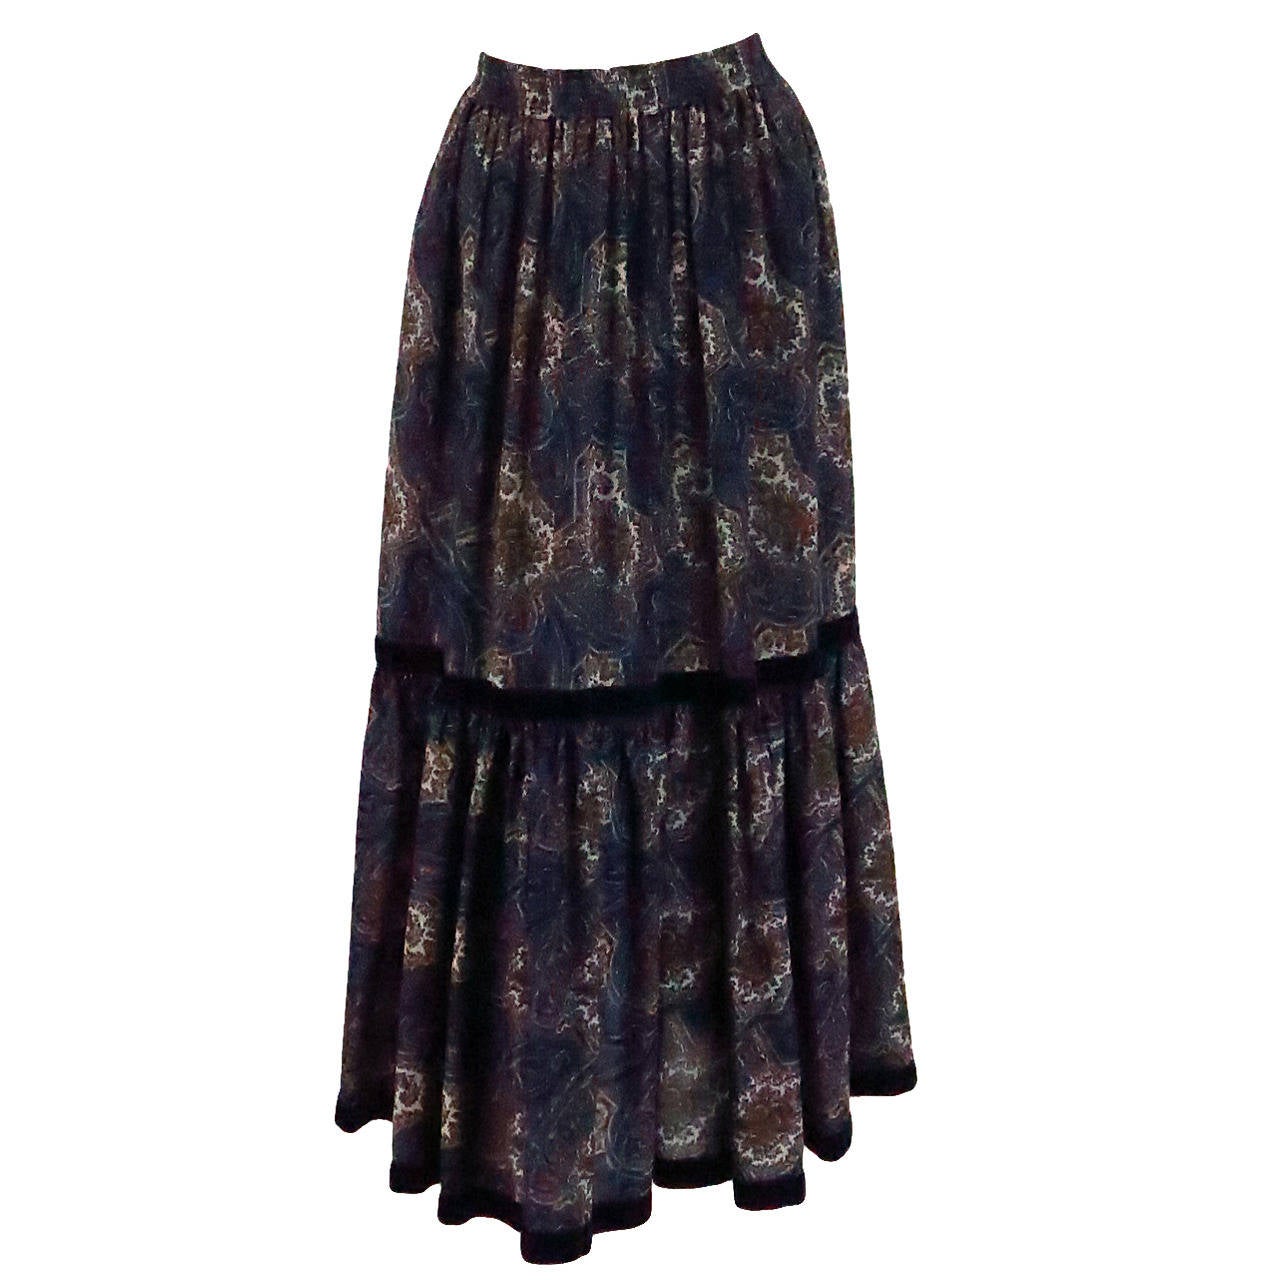 Iconic 1970s Yves St Laurent YSL paisley challis tiered peasant skirt